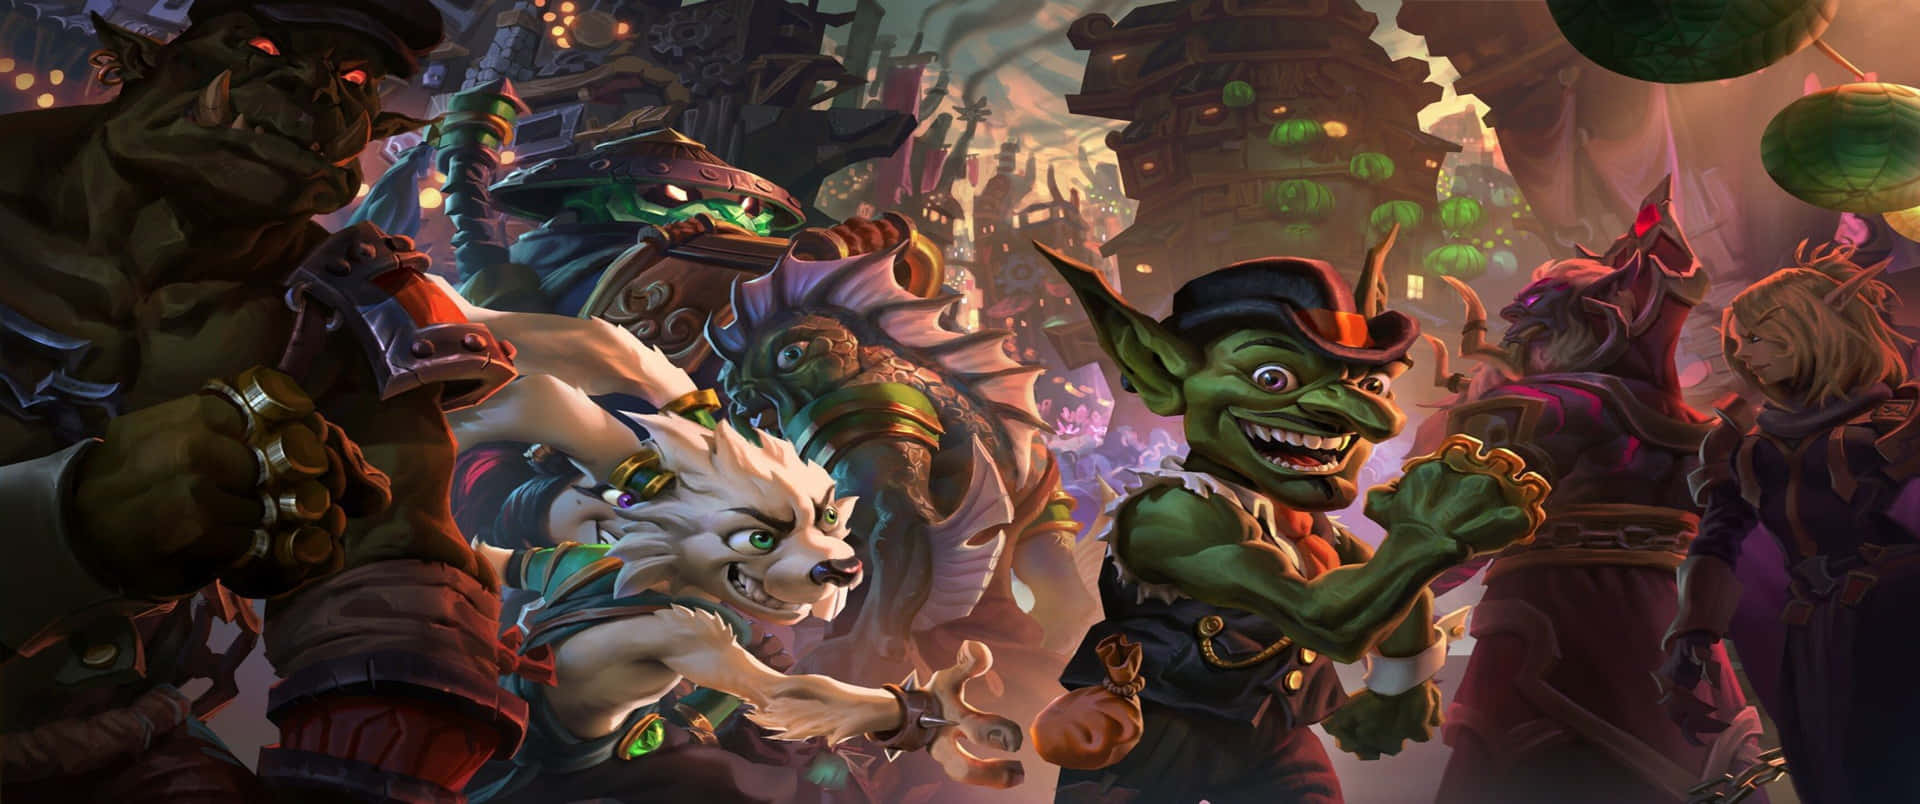 Fill Your Collection With This "Hearthstone" Background